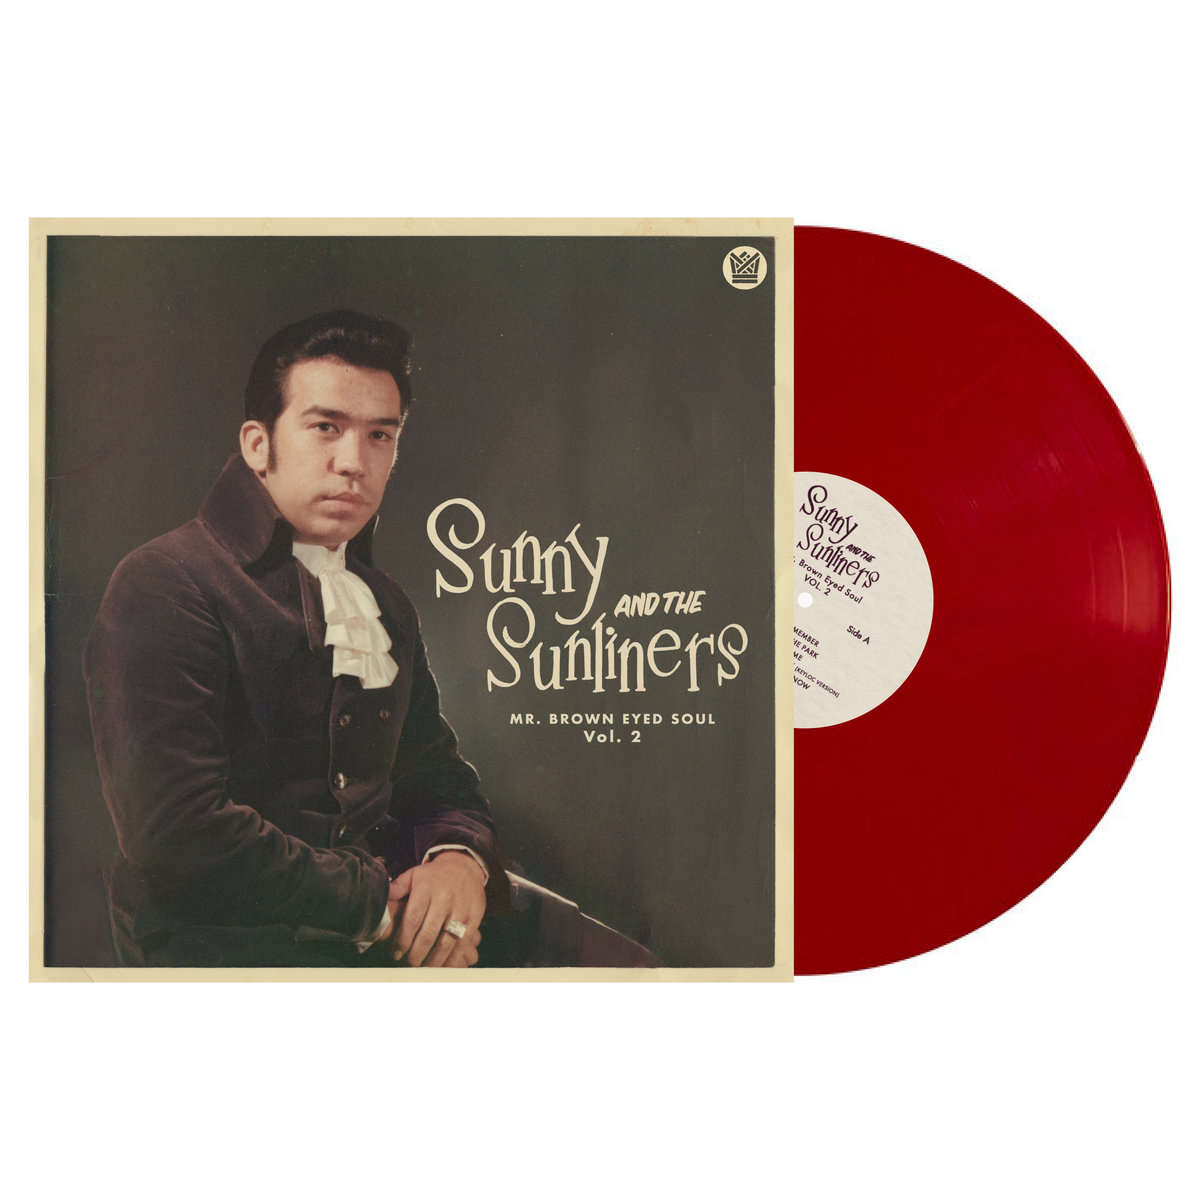 Sunny & The Sunliners (써니 앤 더 썬라이너스) - Mr. Brown Eyed Soul Vol. 2 [레드 컬러 LP]